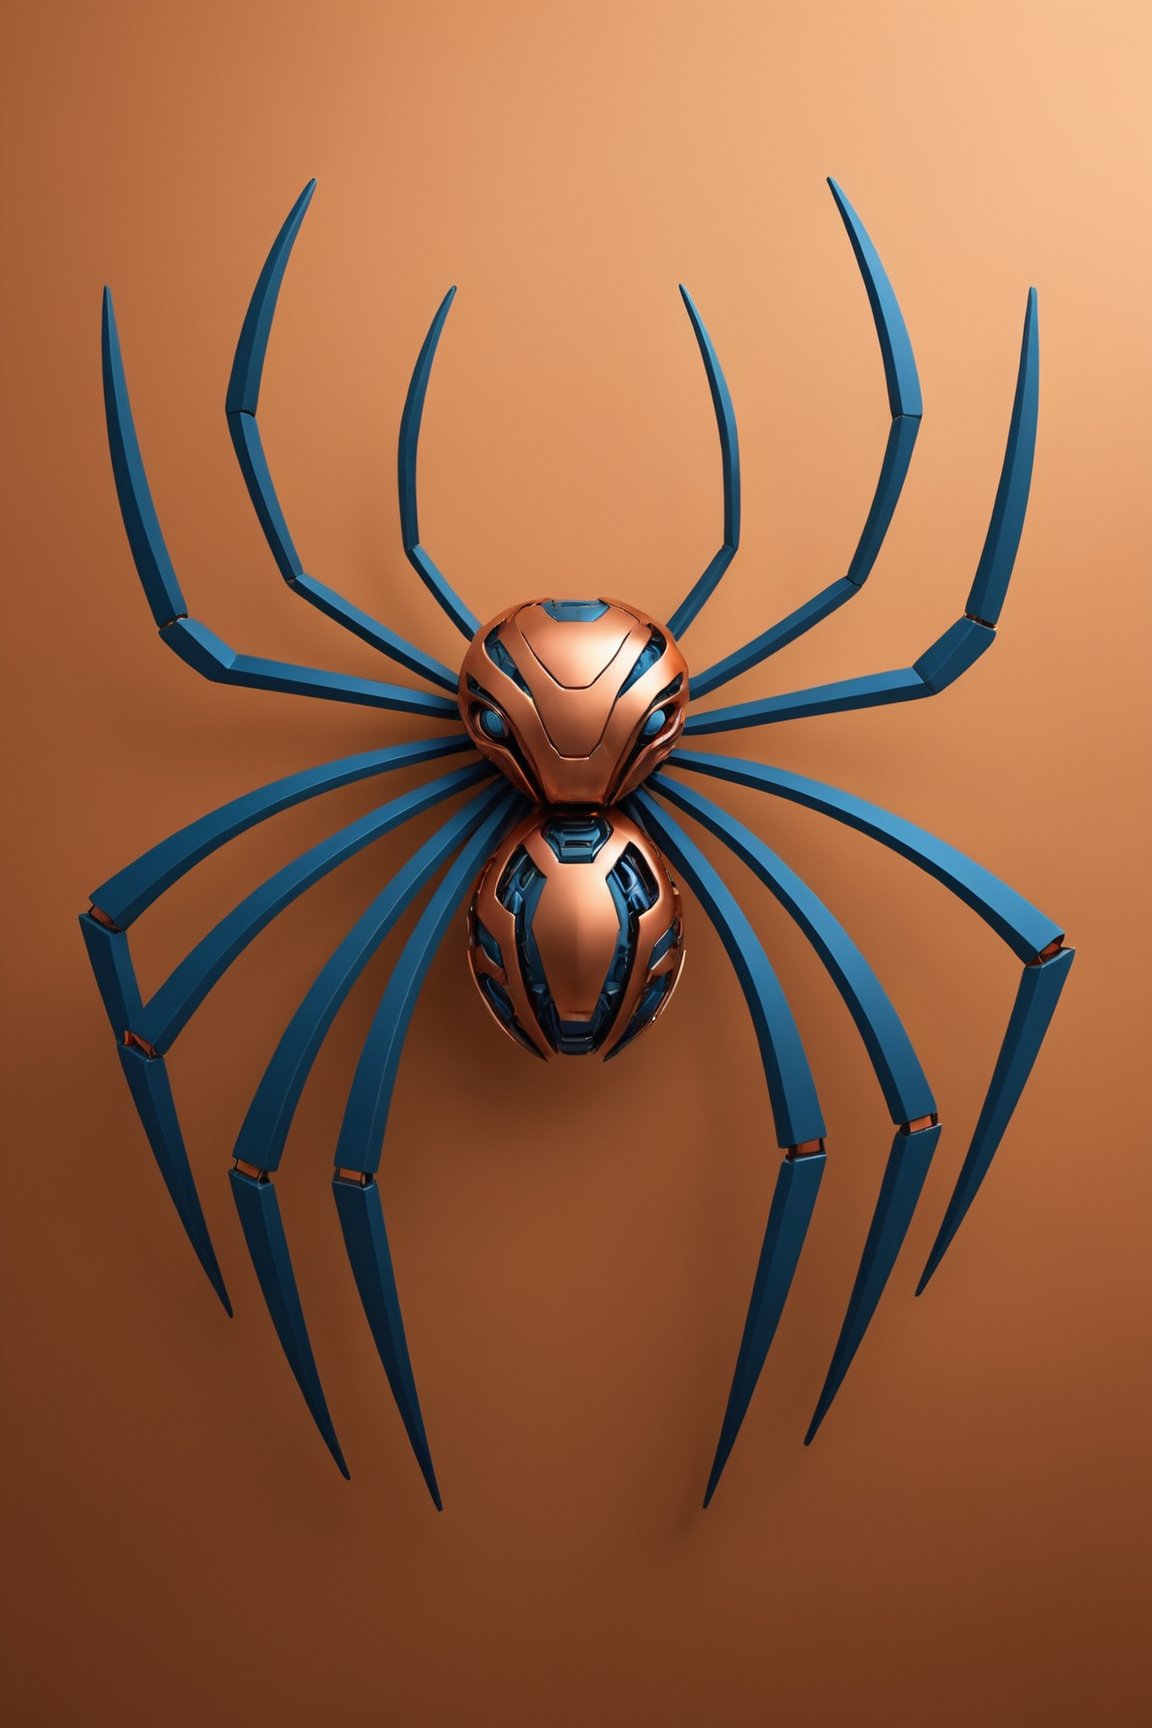 stencil art of breathtaking robotic spider, made of copper, masterpiece, cinematic feel . award-winning, professional, highly detailed . sharp edges, bold, graphic, street art style, vibrant,soft alta calidad:1.1), (detalles muy complejos:1.1), (mejor calidad:1.1) (8K, UHD:1.1 ),ultra 8k,((ultra detailed, masterpiece, absurdres)),((ultra detailed, masterpiece, absurdres)),bad art, low quality, bad anatomy, deformed, disfigured,
